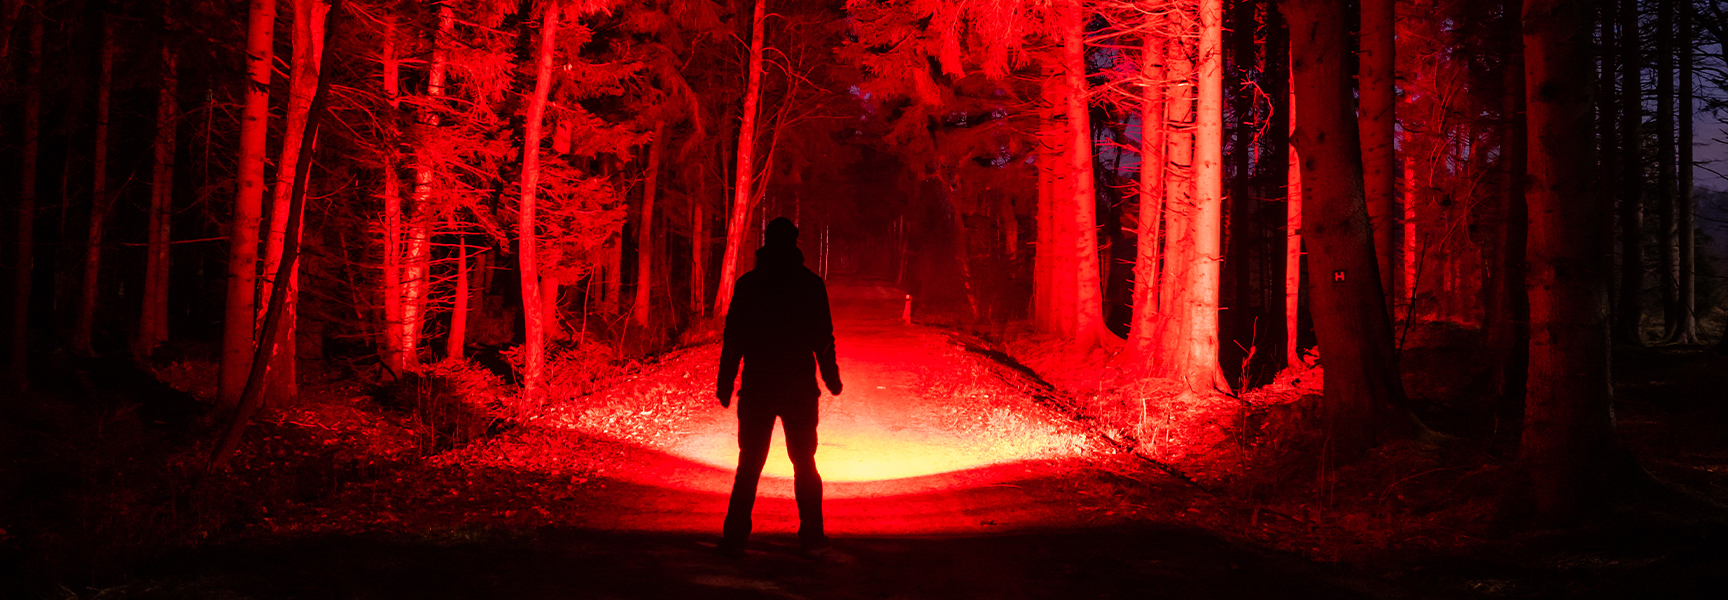 A man in the forest using a red light flashlight